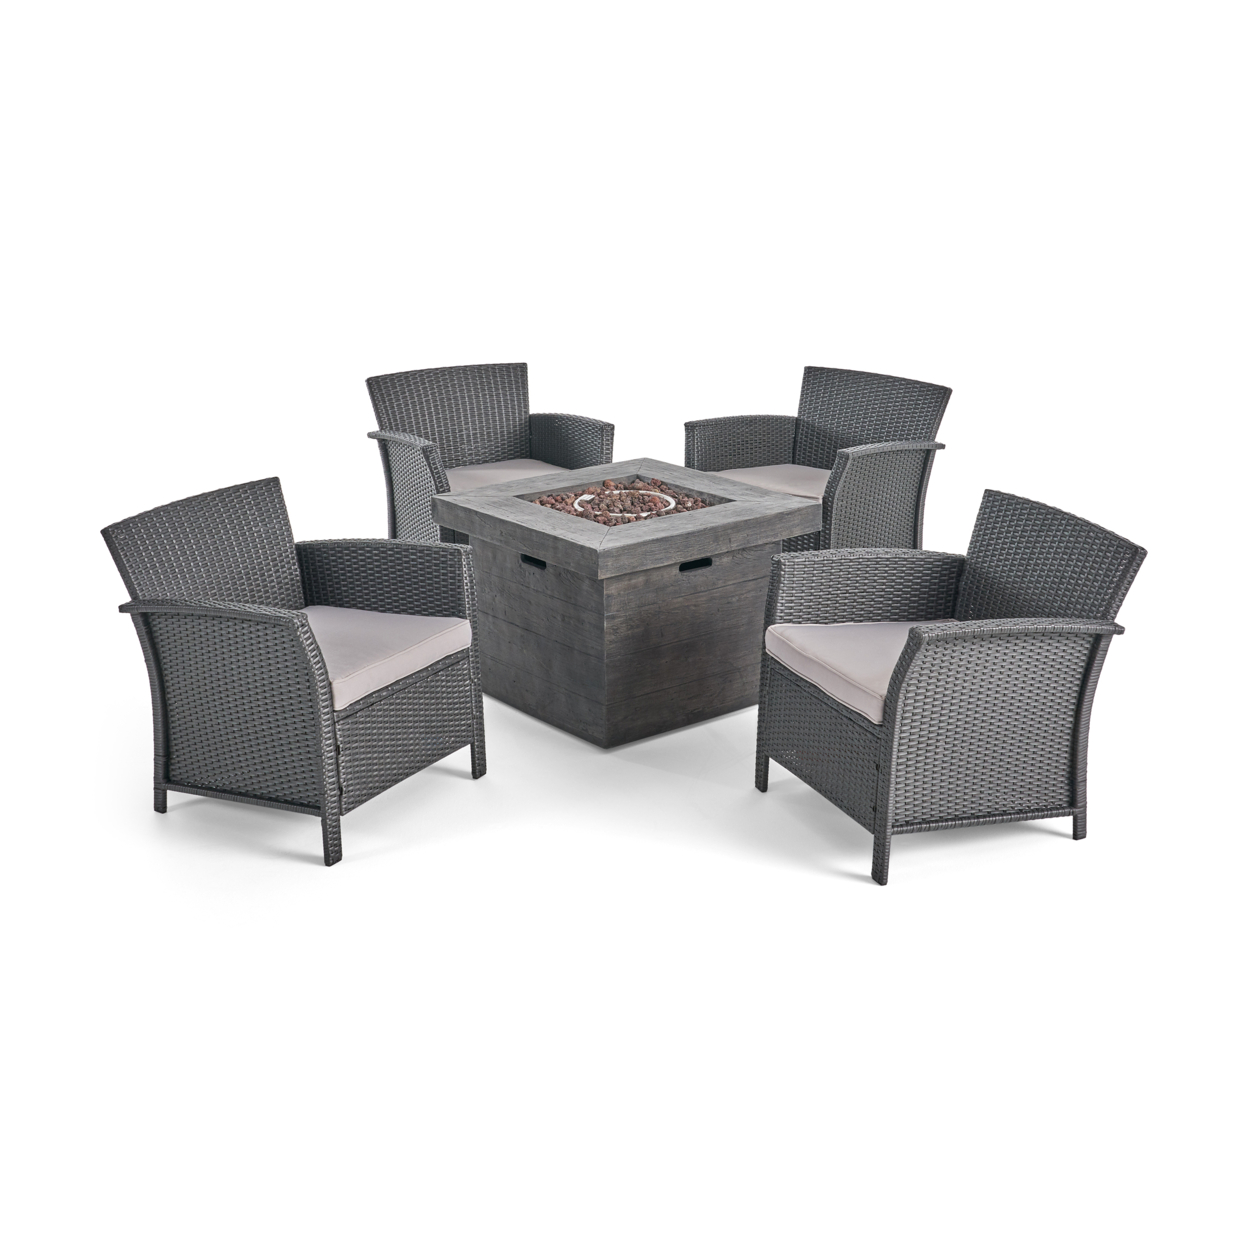 Sarah Outdoor 4 Piece Wicker Club Chair Chat Set With Fire Pit - Gray + Silver